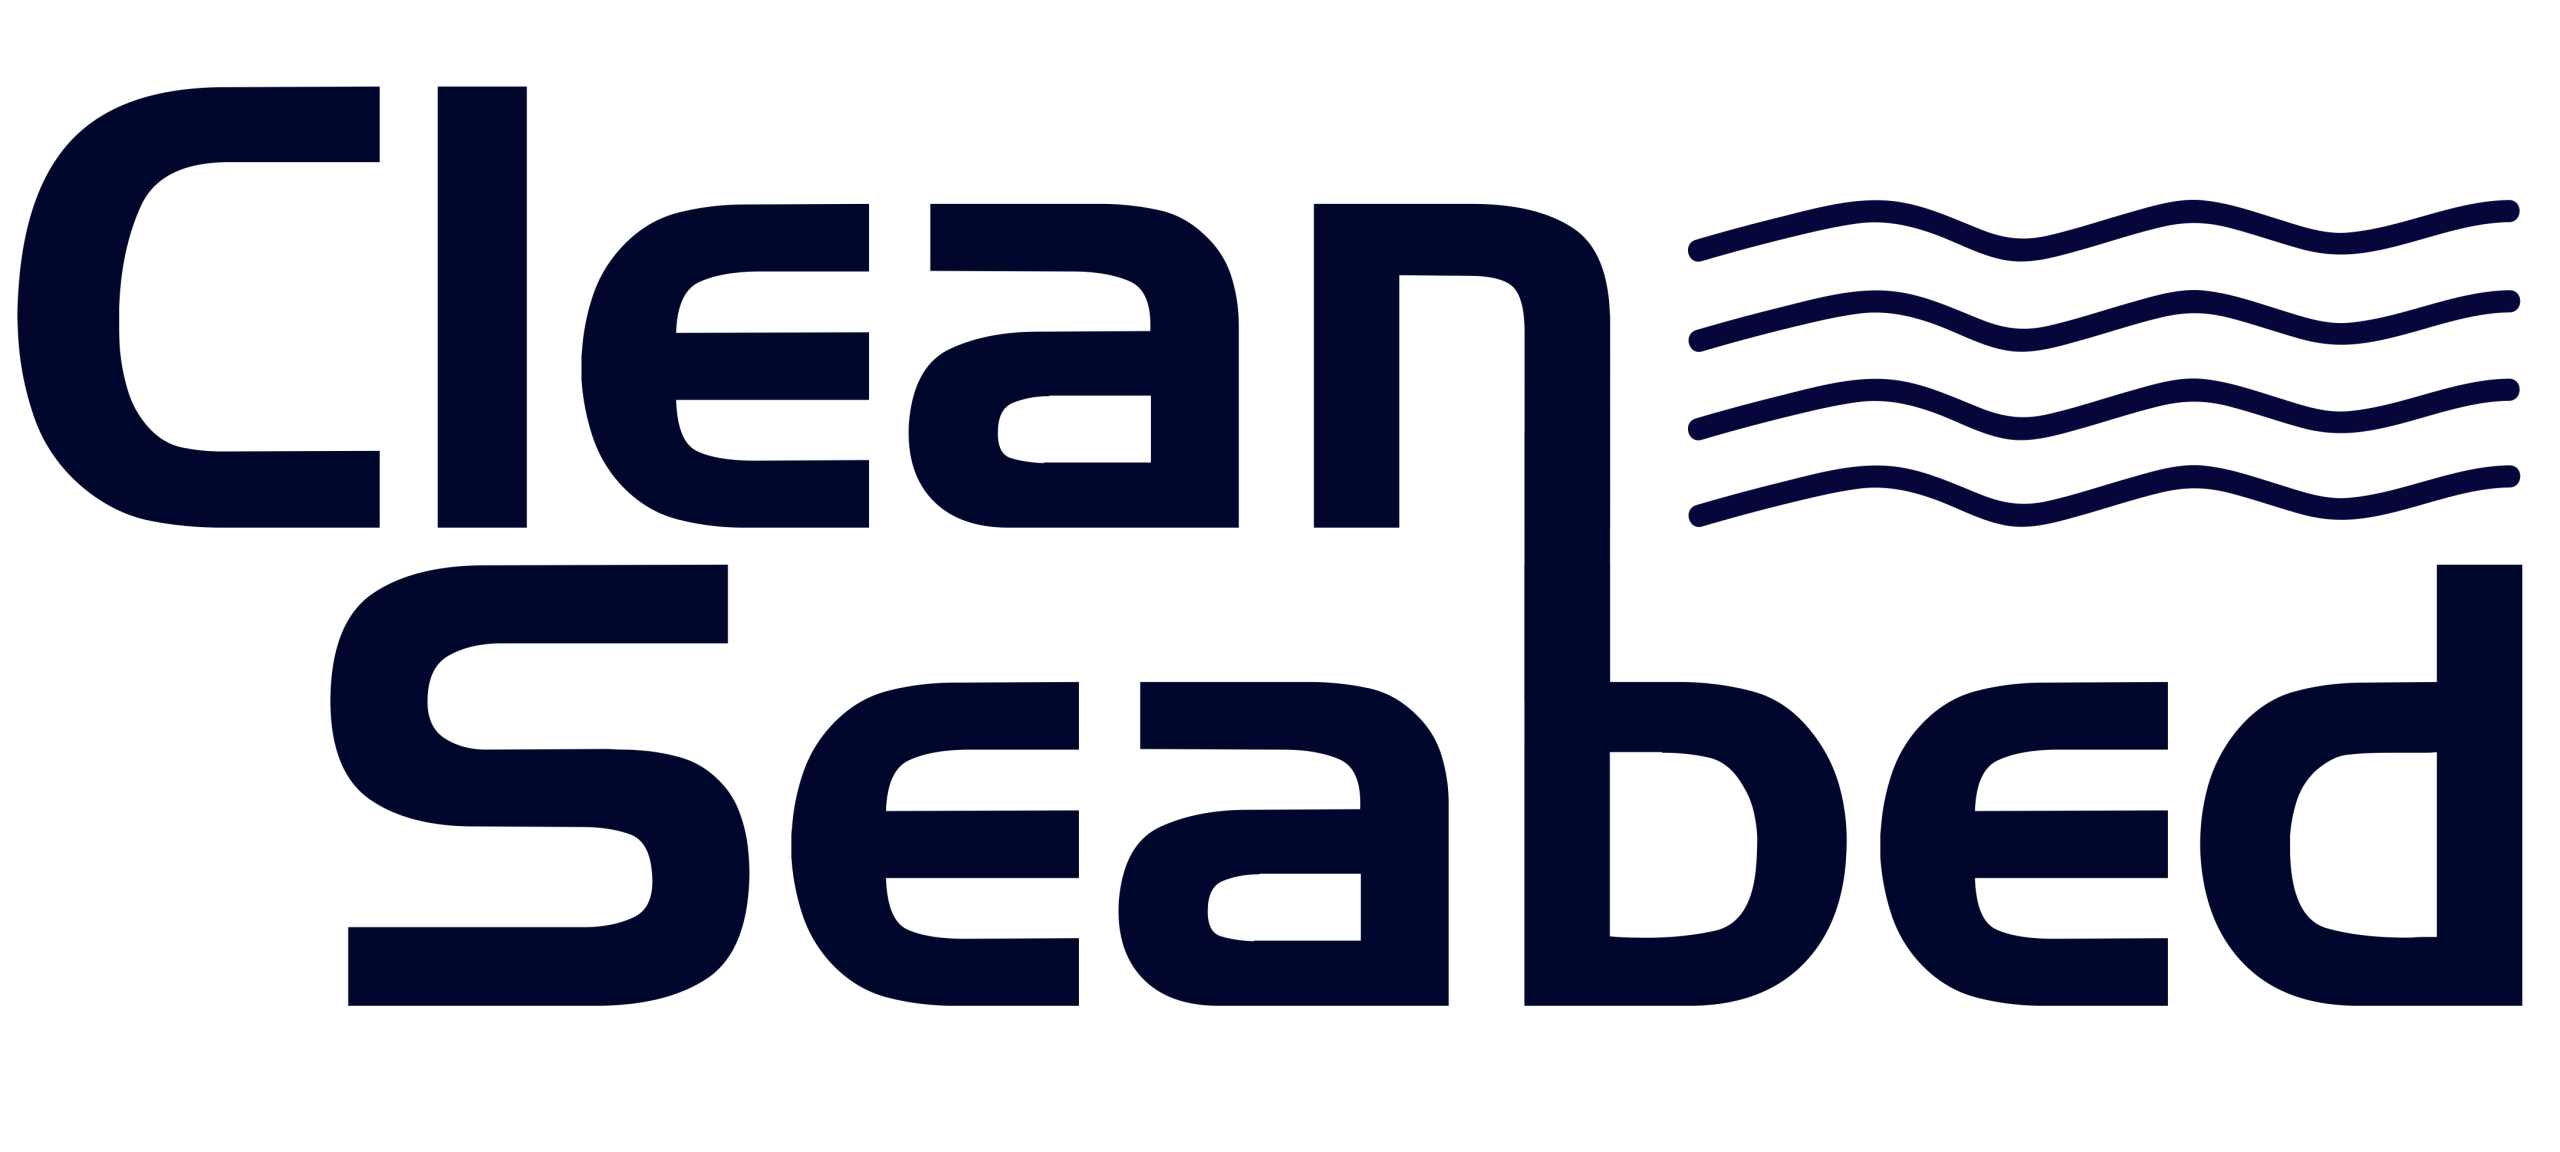 cleanseabed.org